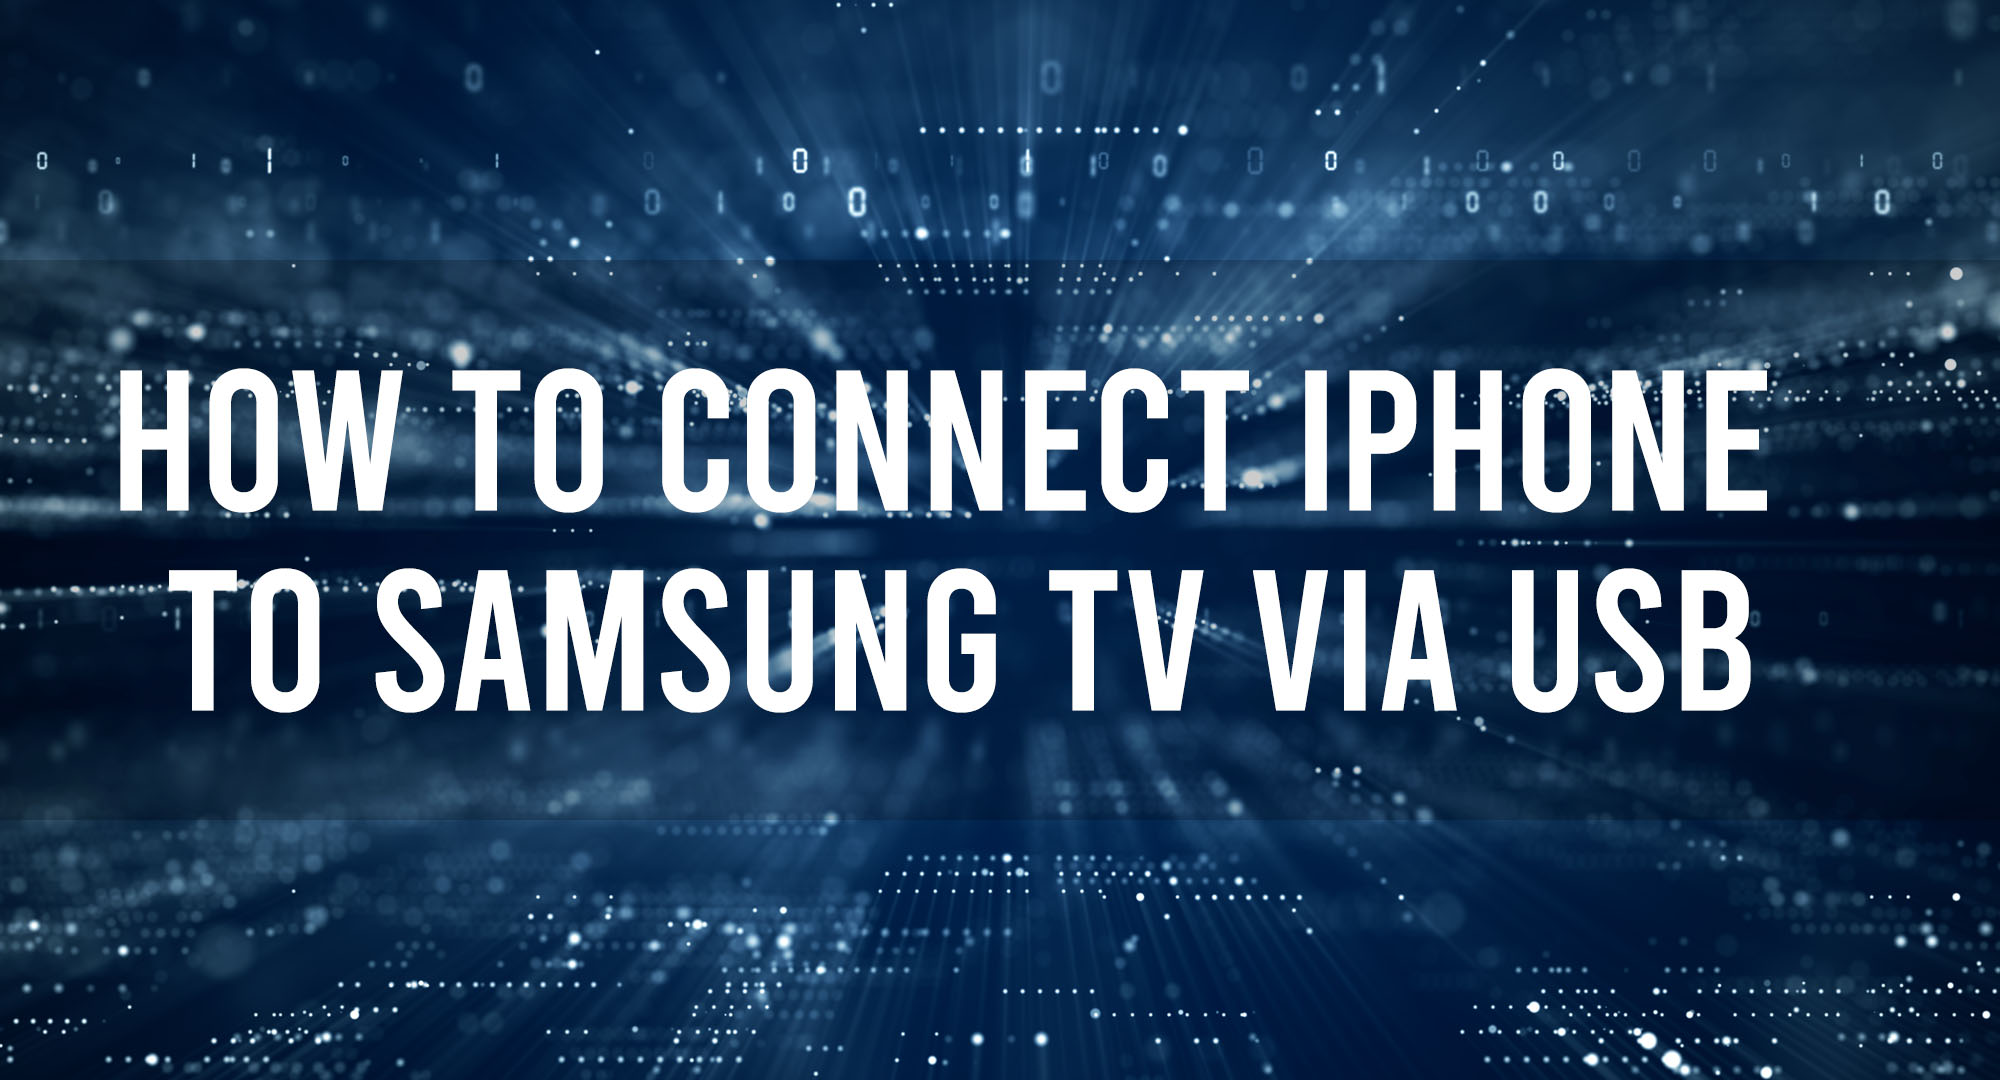 How to connect Iphone To Samsung TV VIA USB